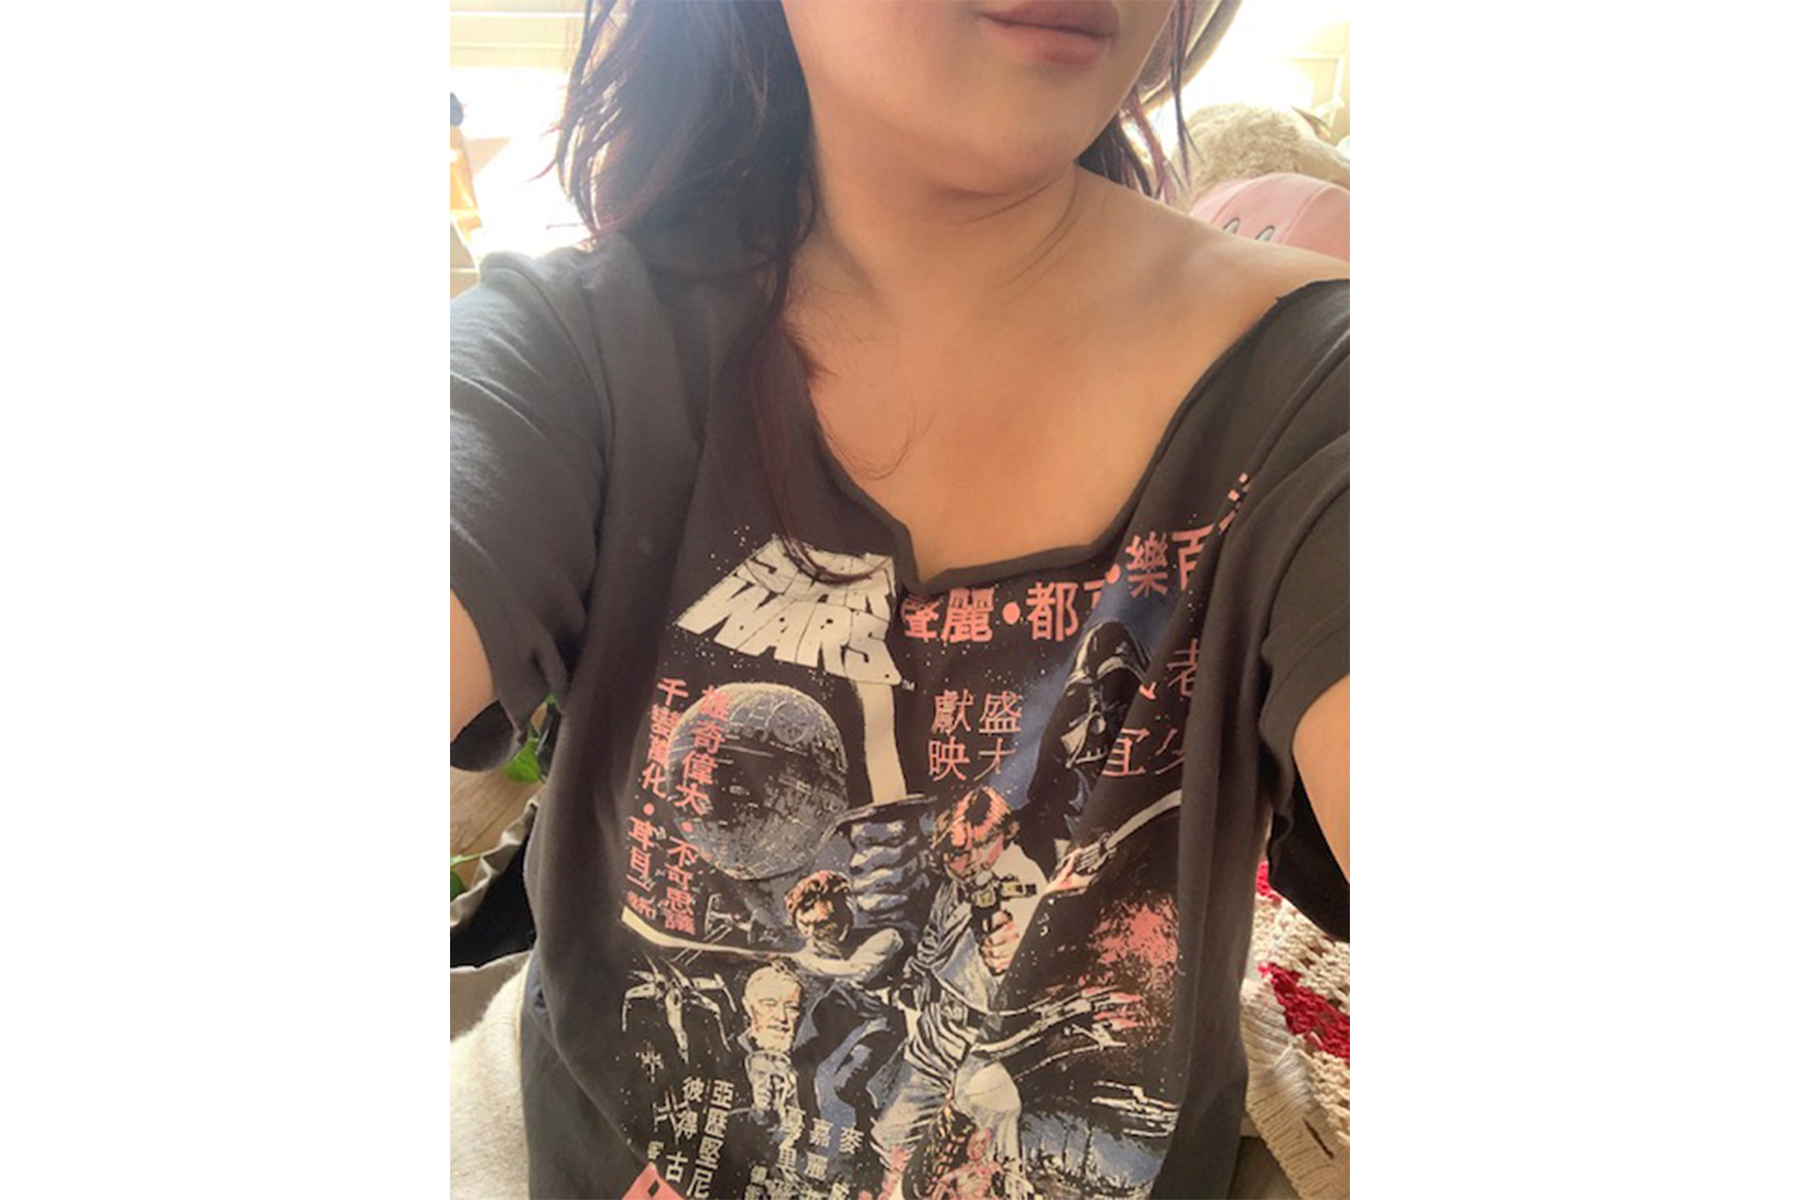 An image of a fan wearing a Chinese Star Wars graphic T-shirt